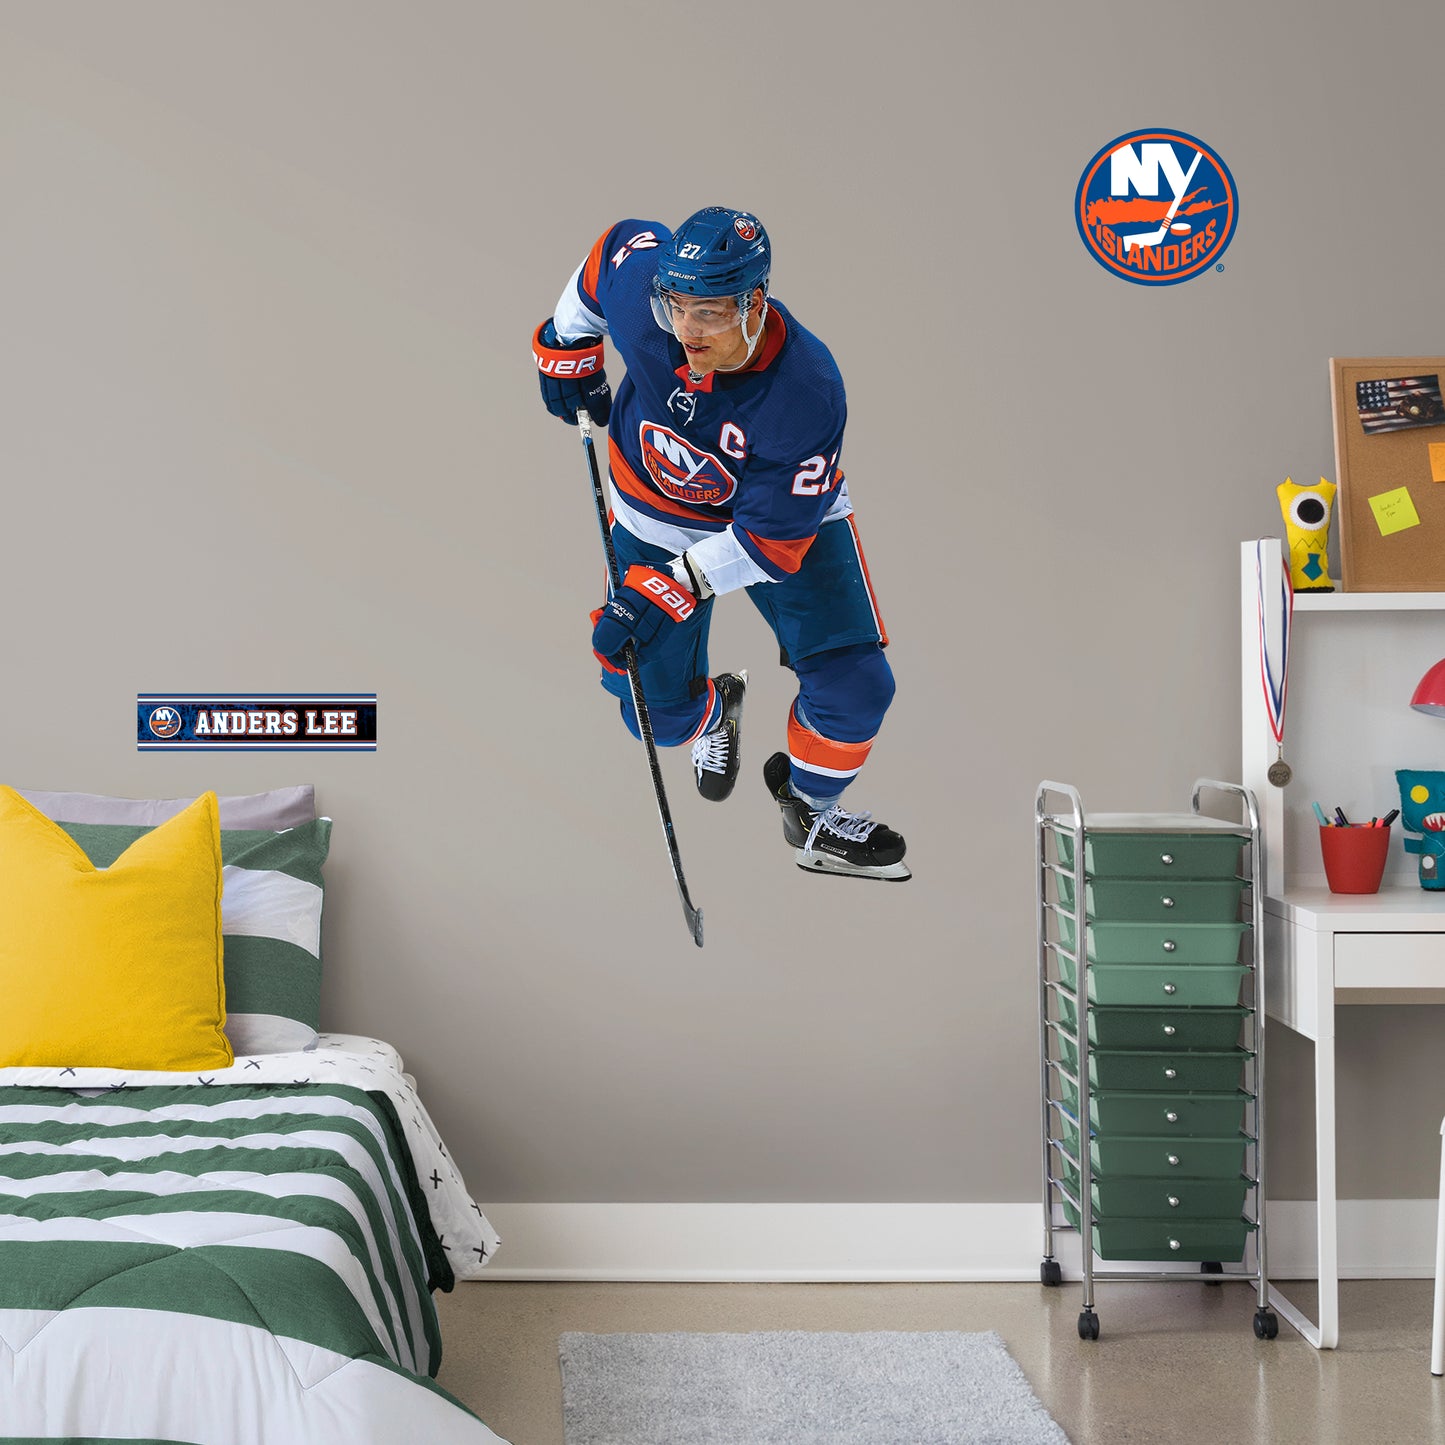 Giant Athlete + 2 Decals (26"W x 51"H) NHL fans and Islanders fanatics alike love Anders Lee, the clutch captain from New York, and now you can bring the action to life in your own home! This durable, bold, and removable wall decal set will make the perfect addition to your bedroom, office, or fan room! Let's Go Islanders!